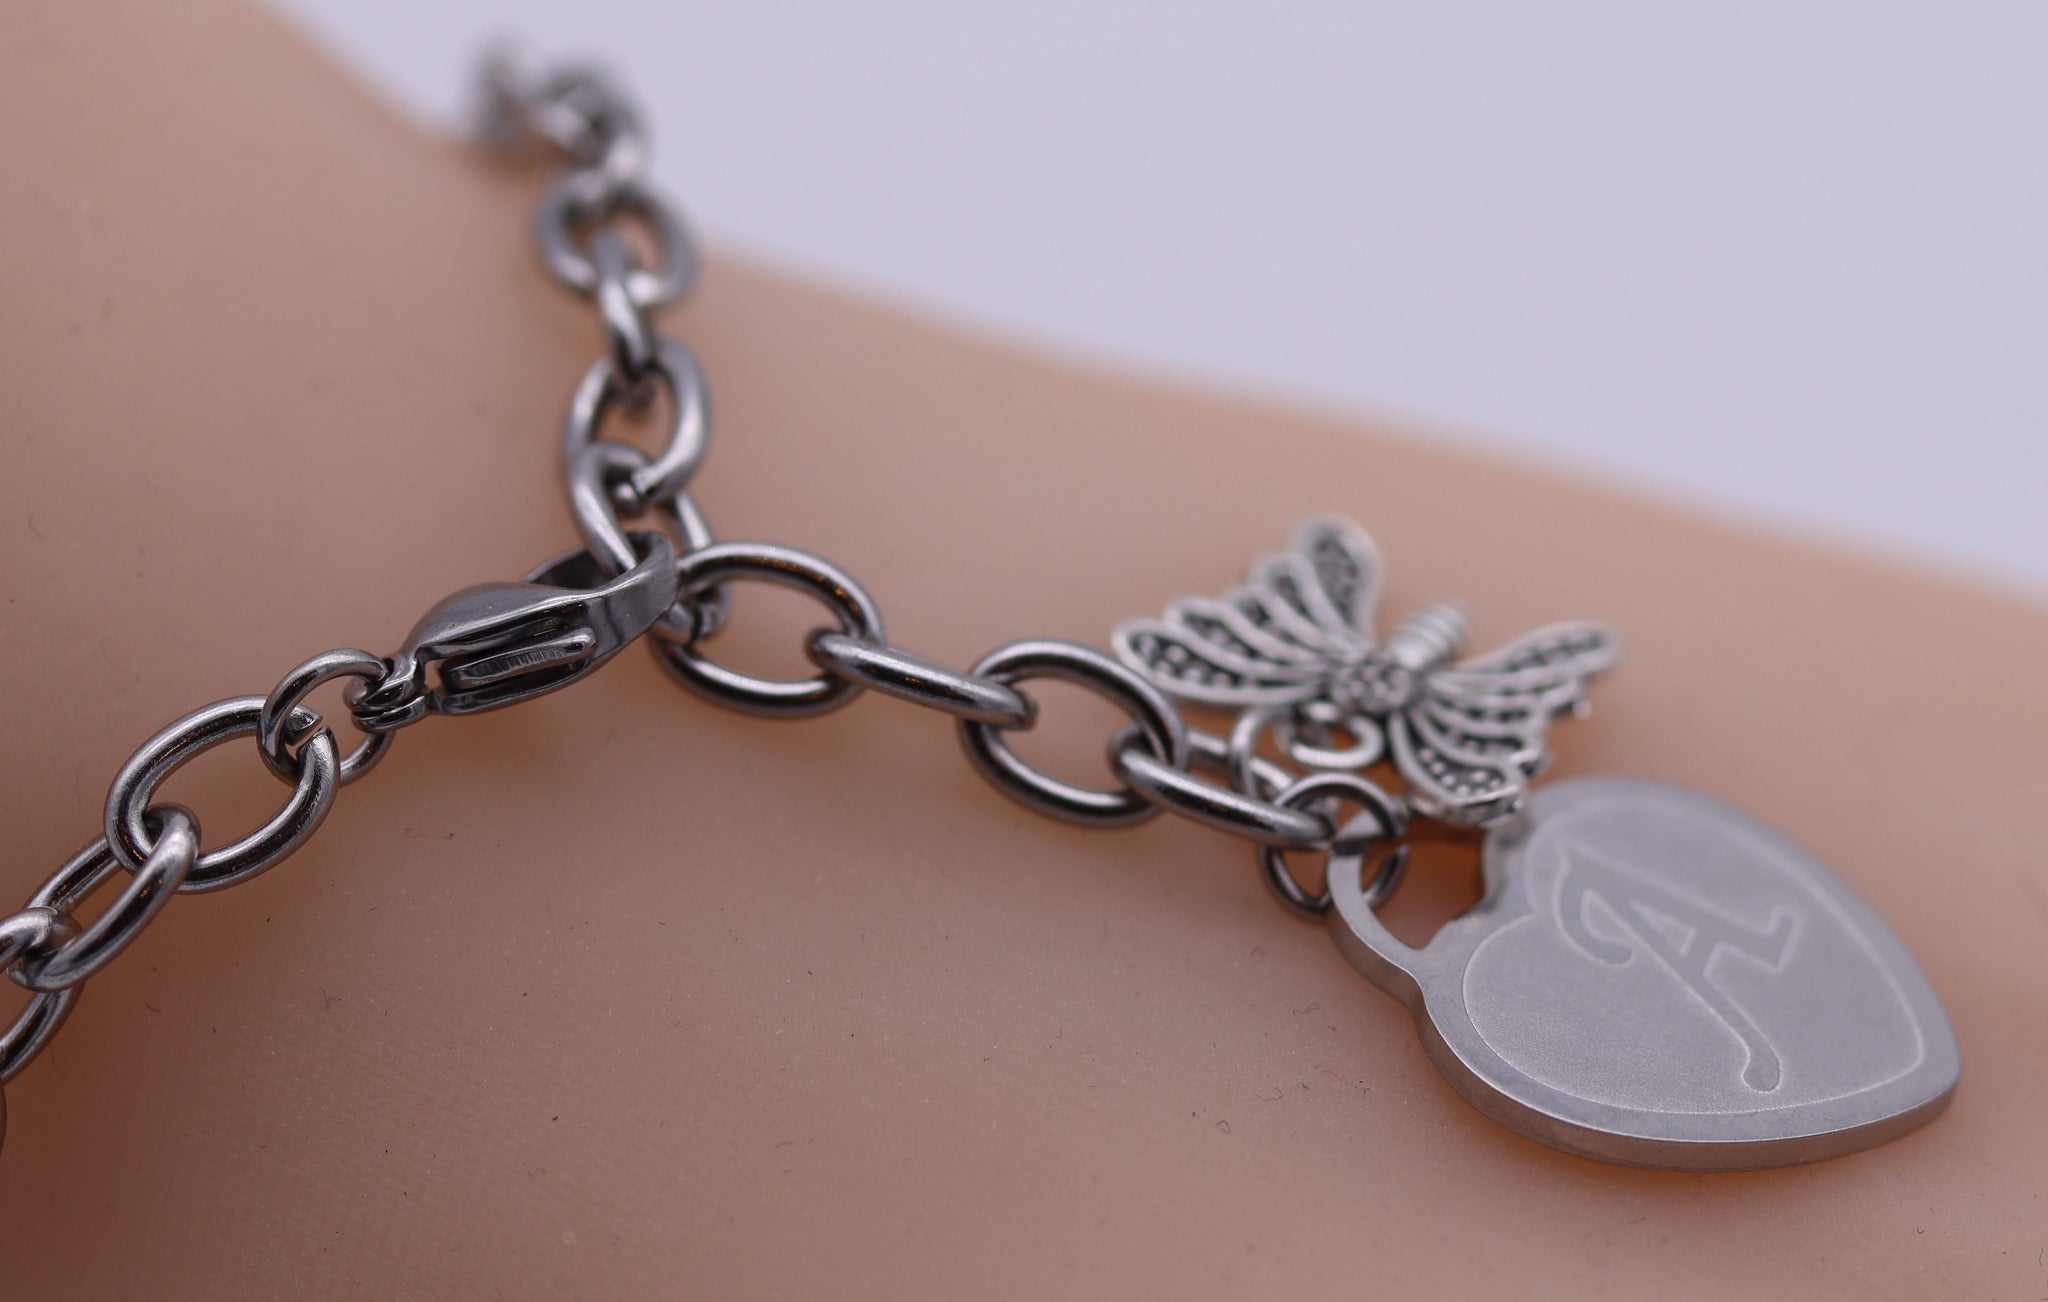 Stainless Steel Bracelet with Butterfly Charm  and Engraved Initials on Heart (Silver)